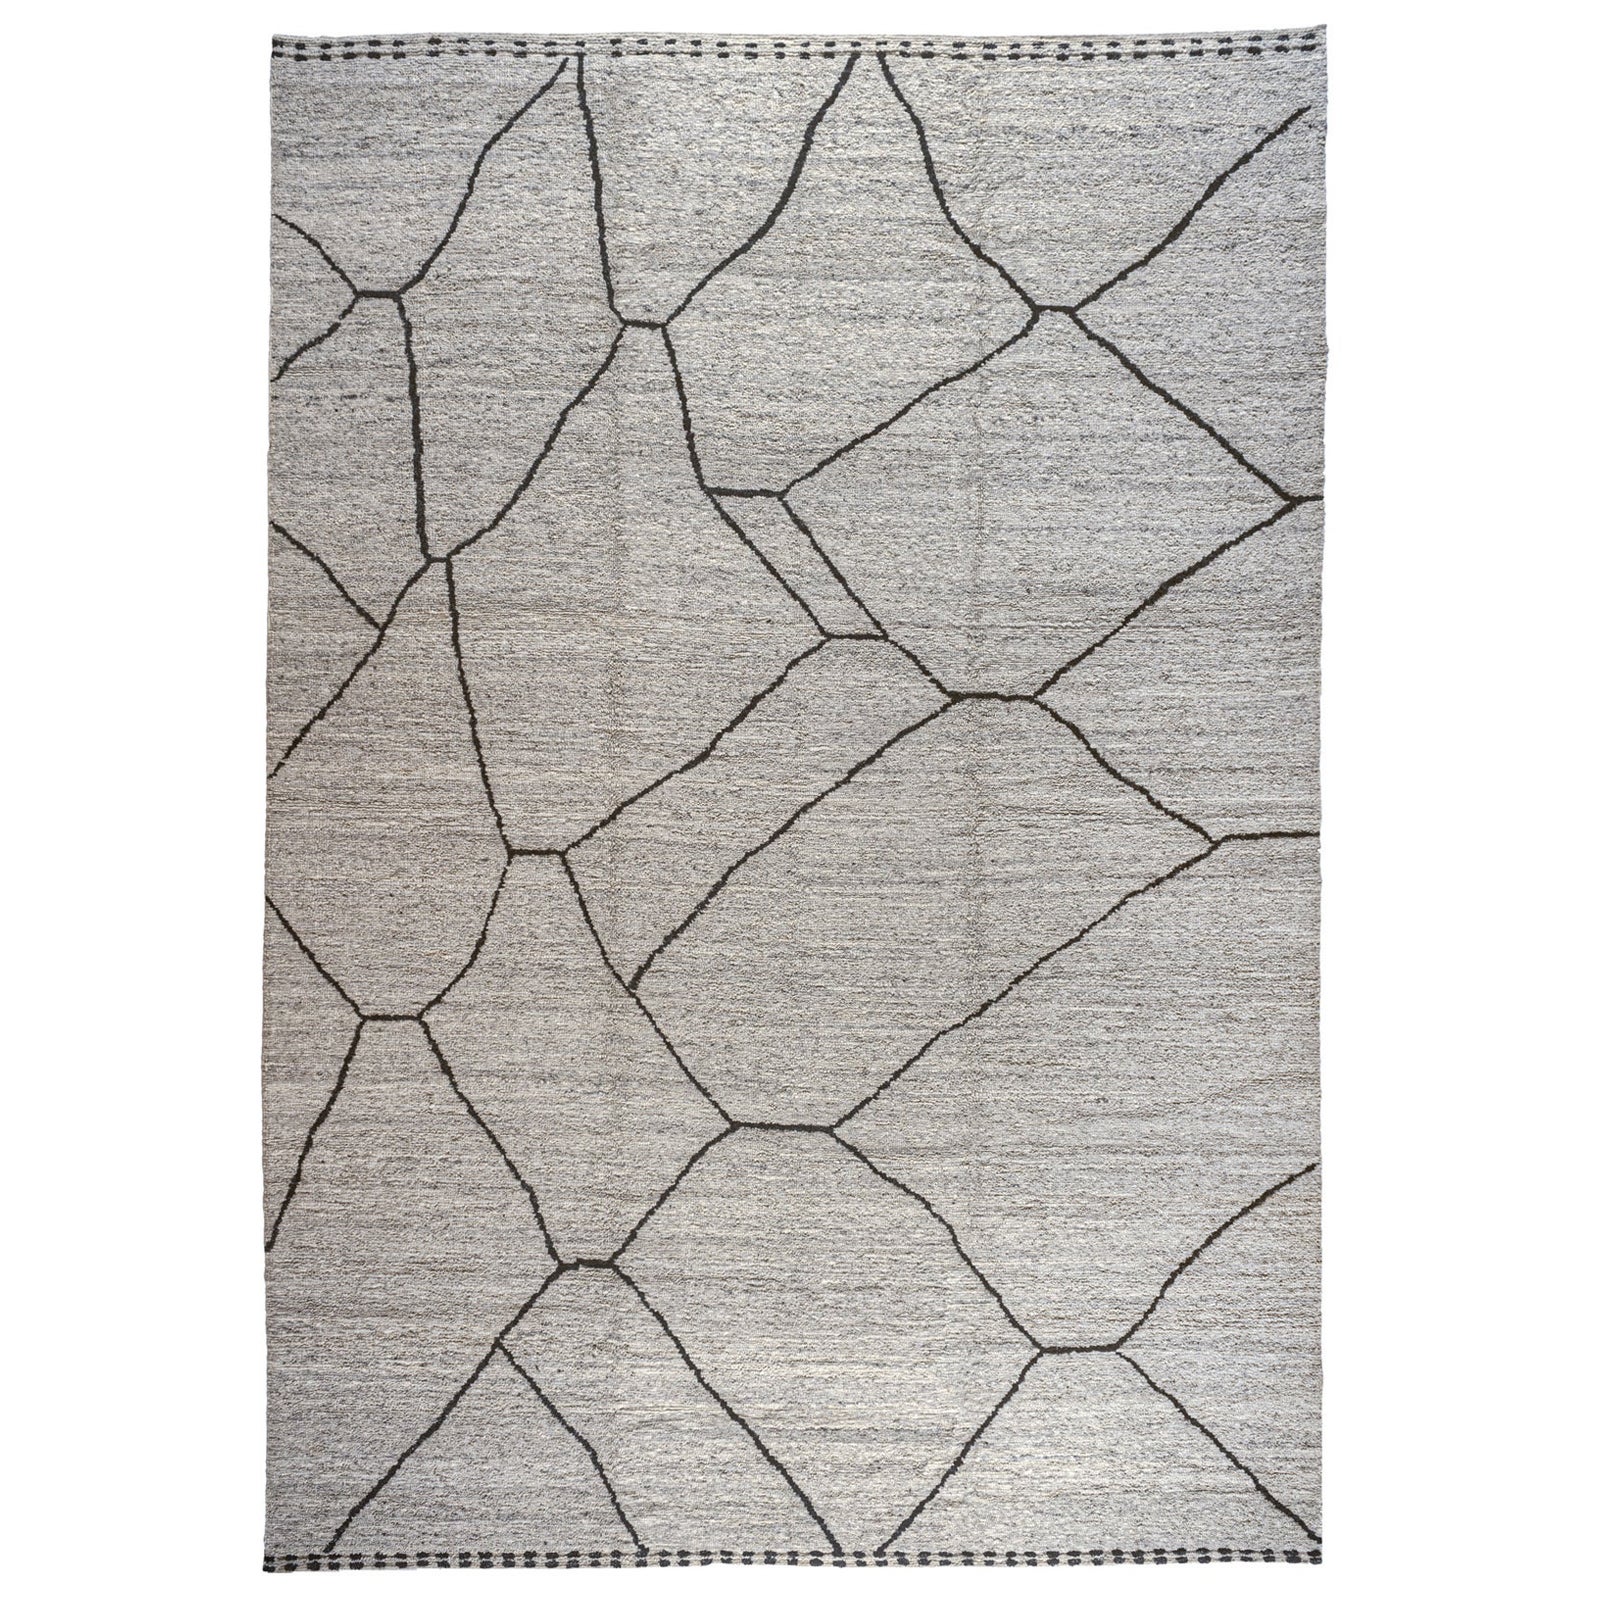 Beige and Charcoal Moroccan Design Rug